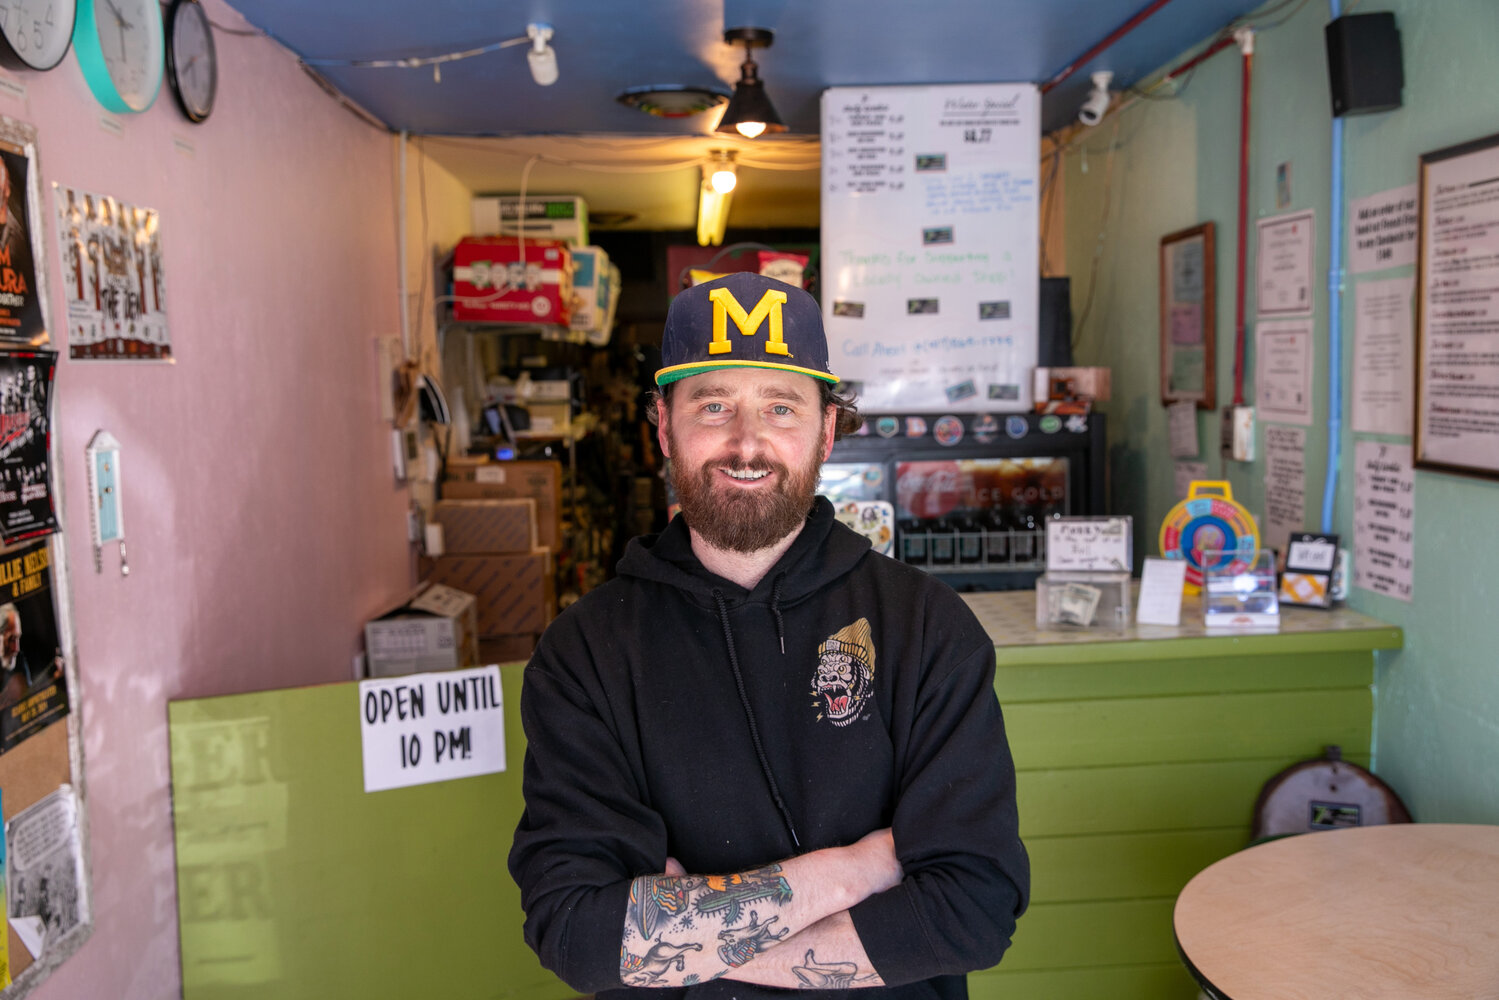 Chris Turbov and his team make up to 720 sandwiches daily at the 7th on Walnut eatery downtown, a small storefront built in a former breezeway.